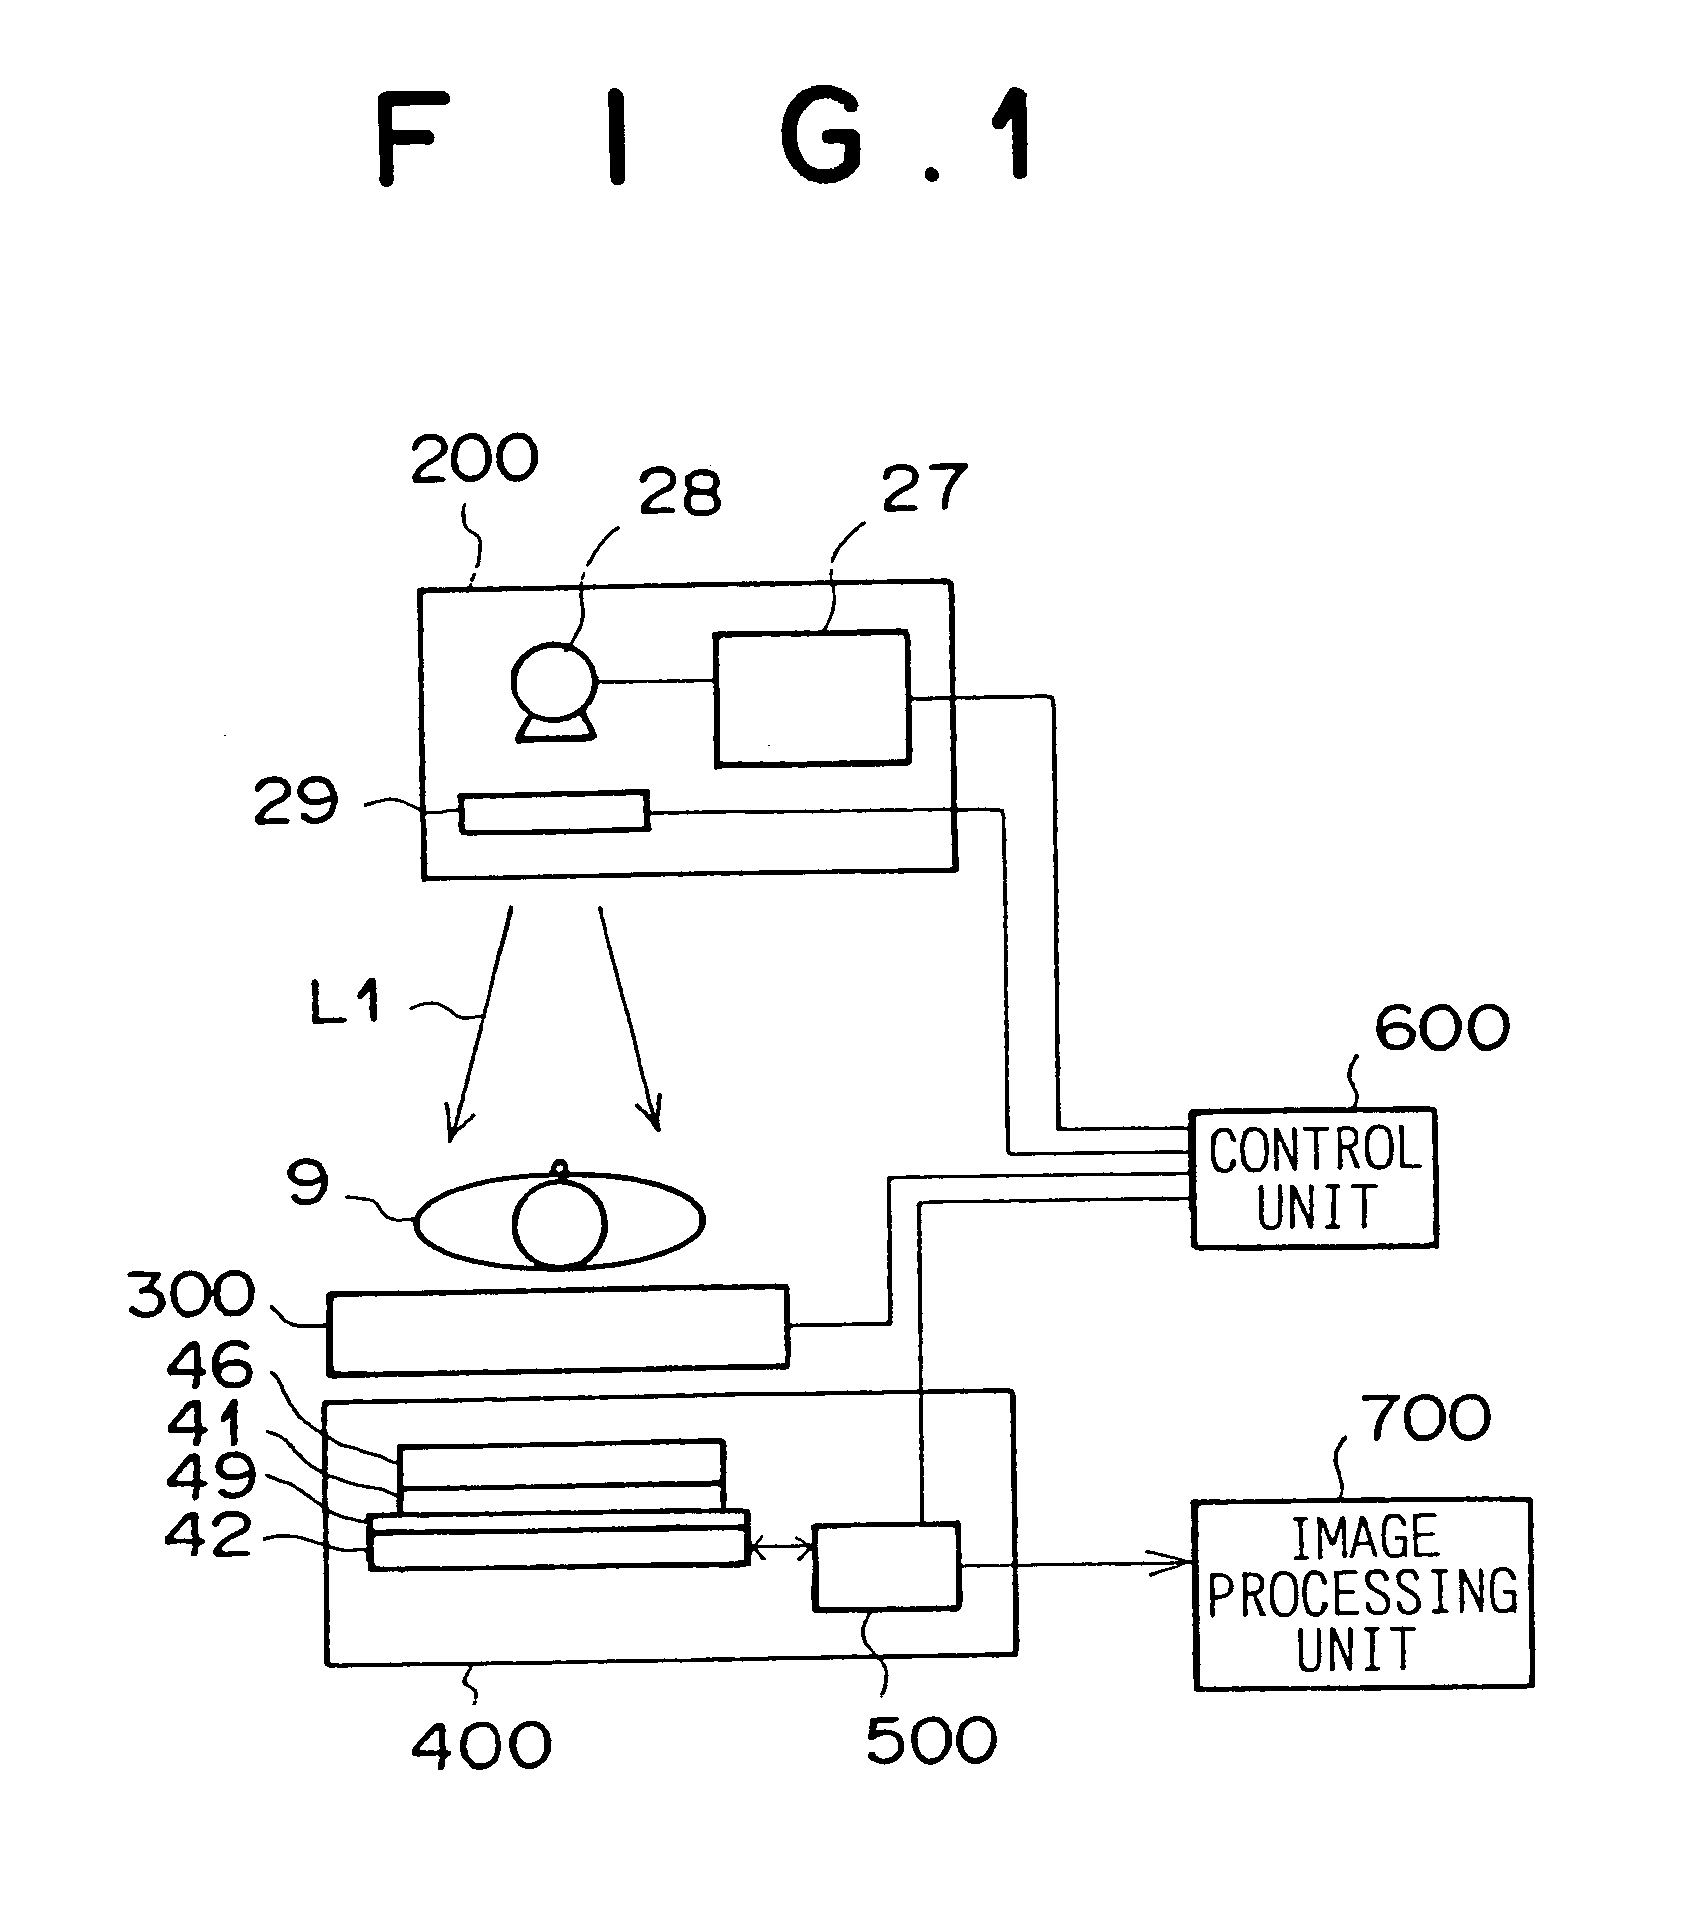 Solid-state radiation detector in which signal charges are reduced below saturation level